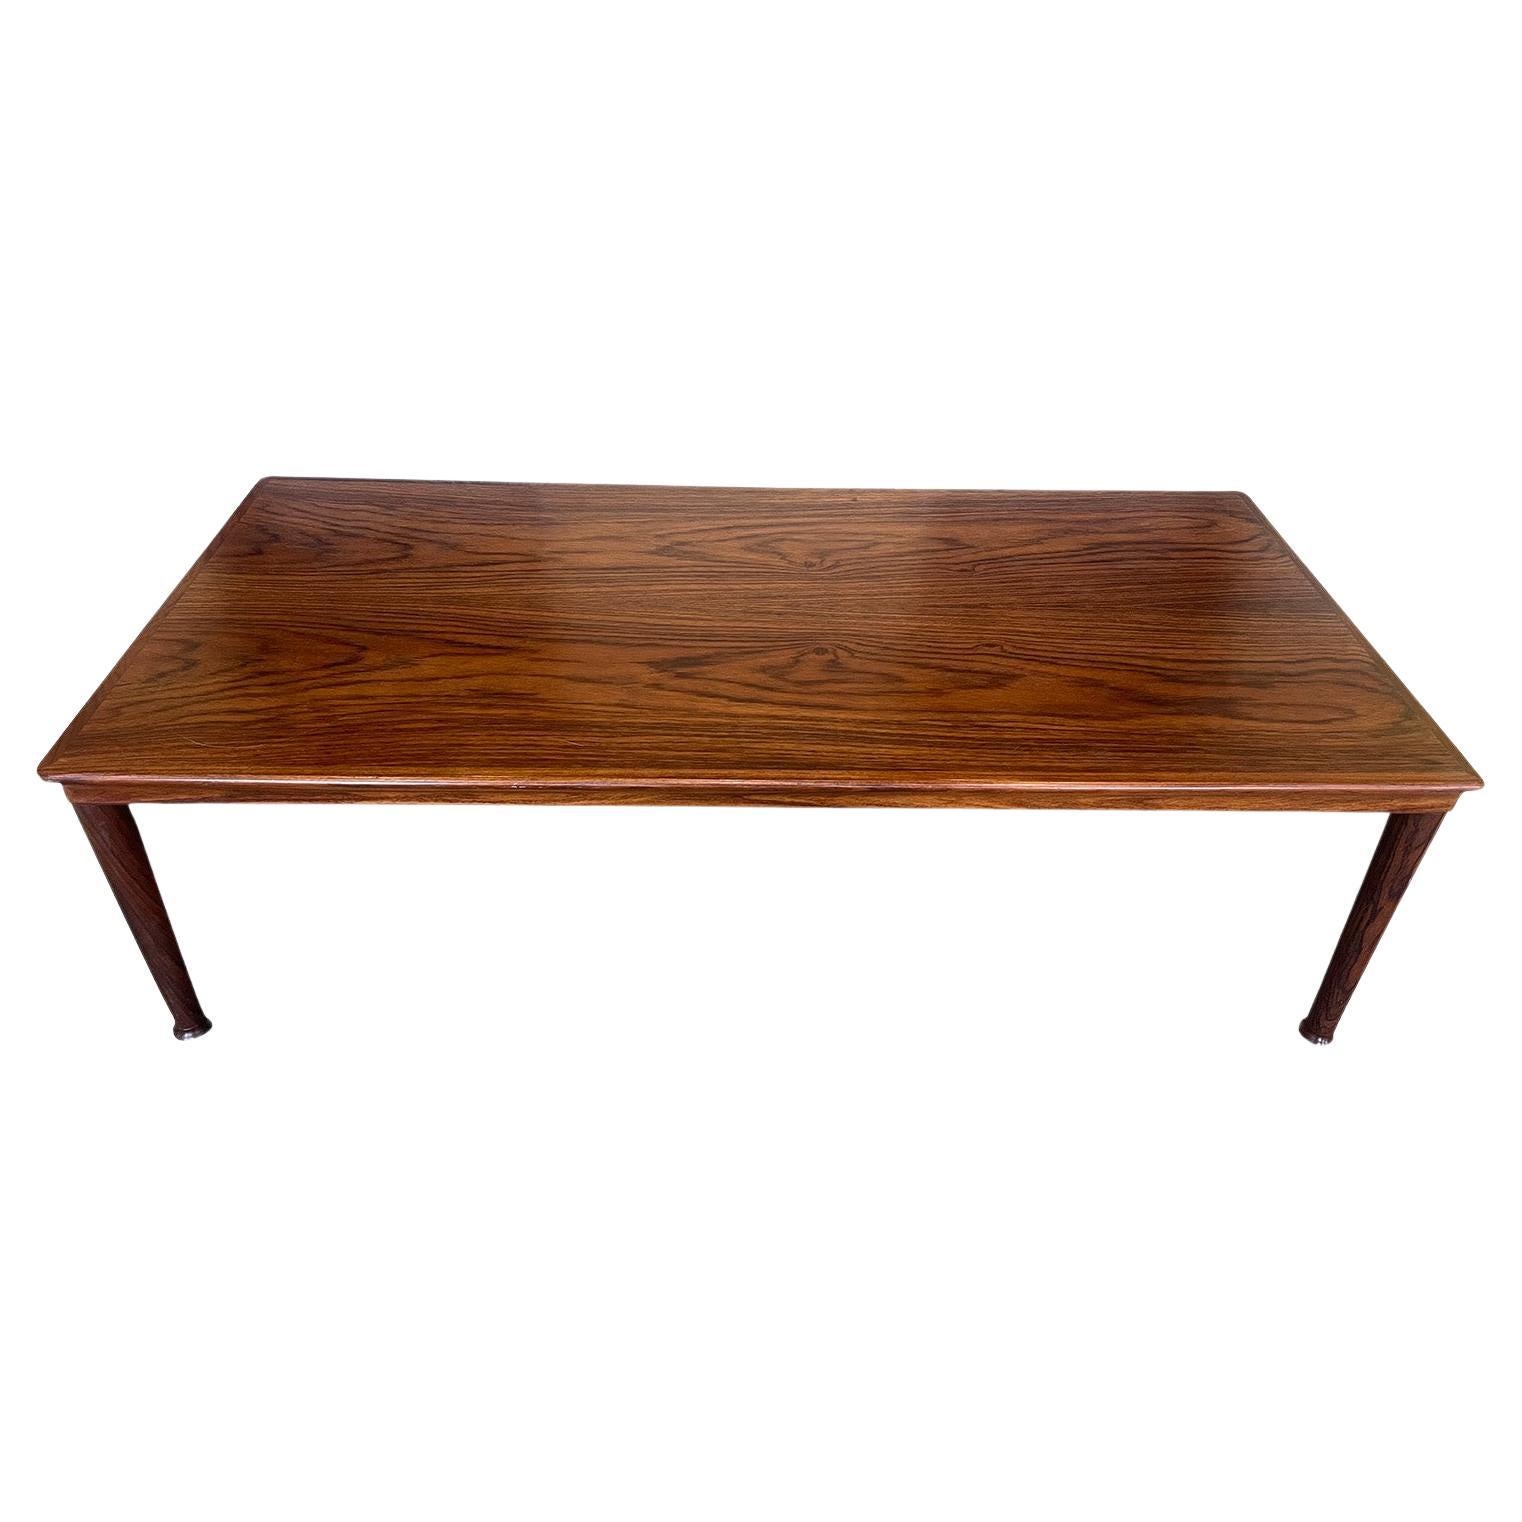 1960s Danish Rosewood Coffee Table by Møbelfabrik For Sale